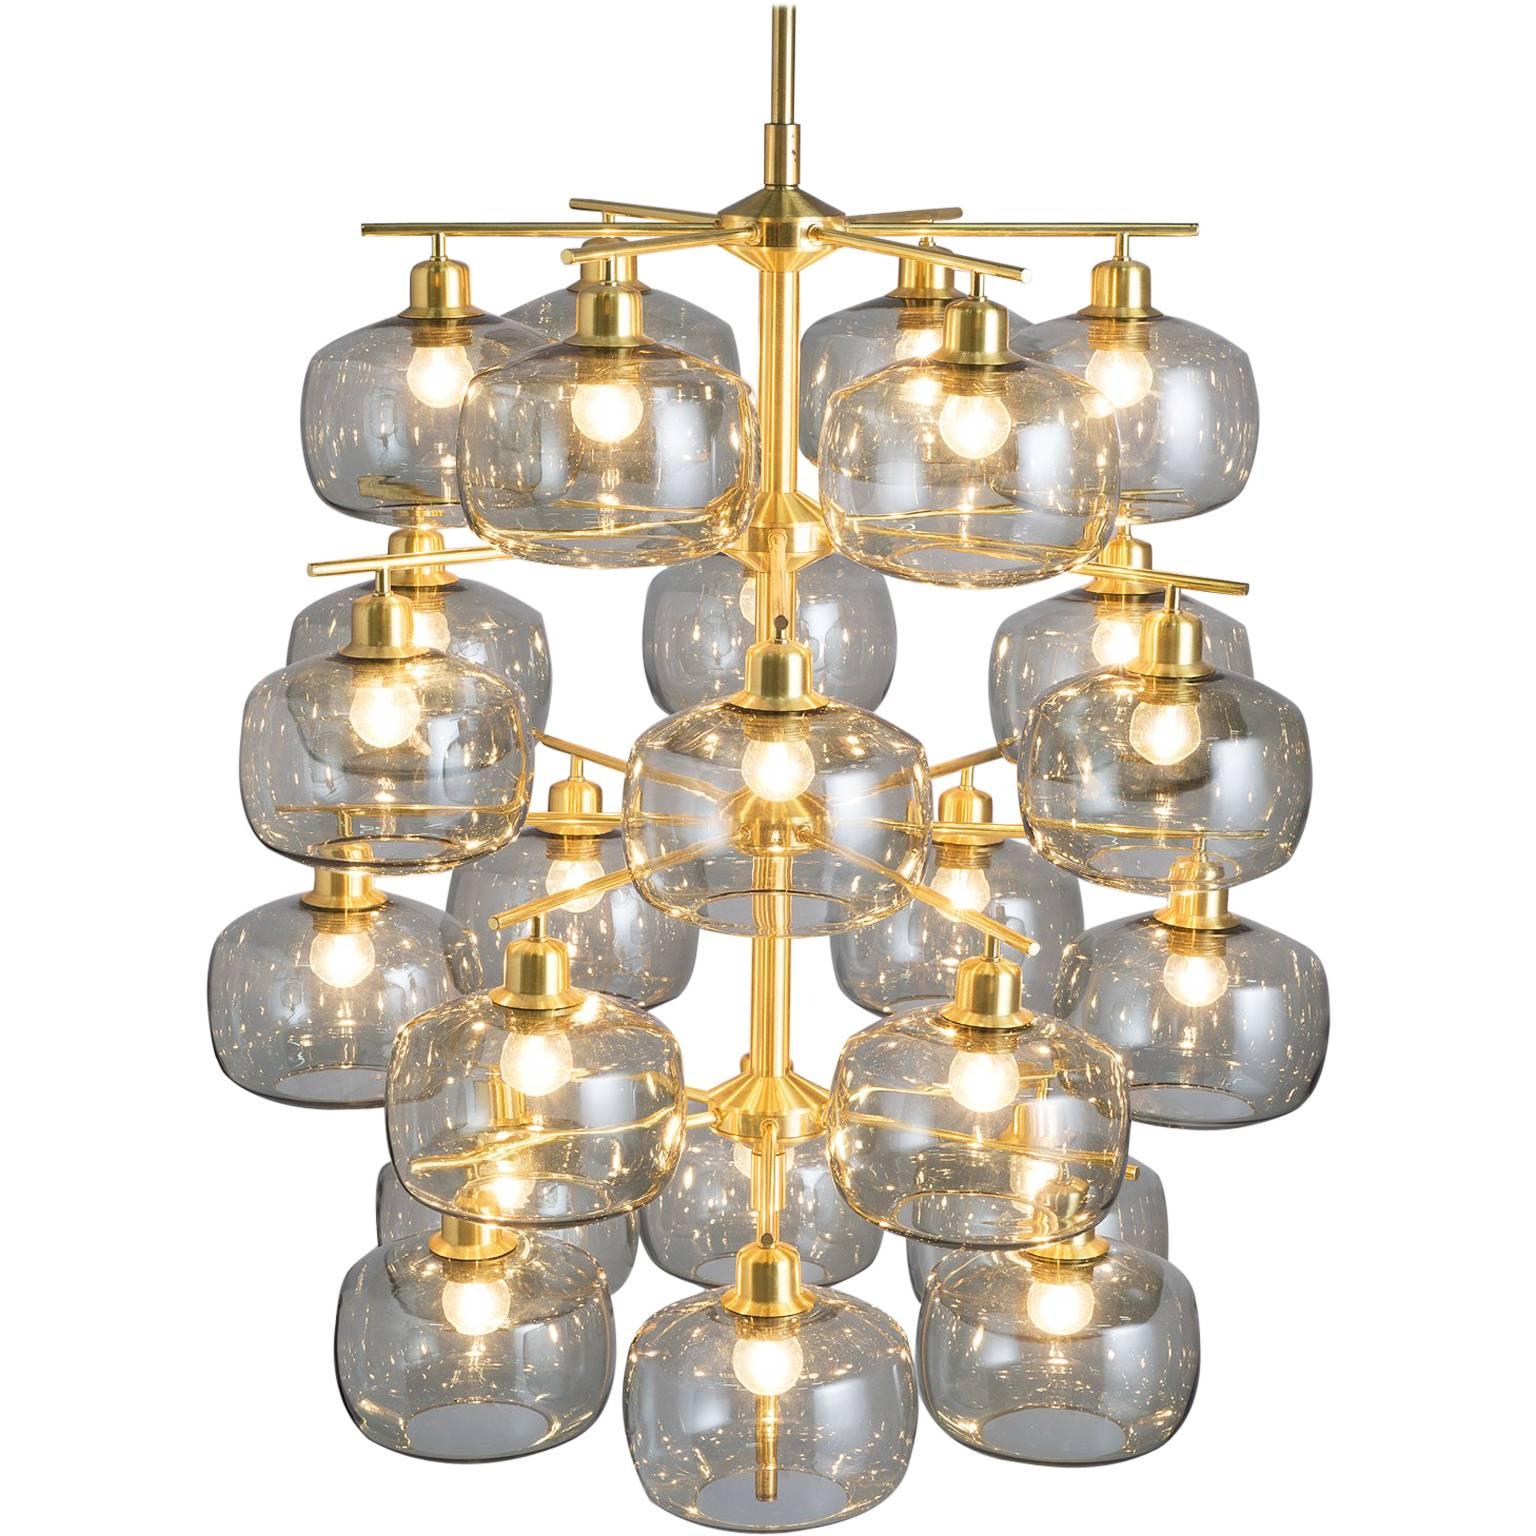 Eight Large Swedish Chandeliers by Holger Johansson, 1952